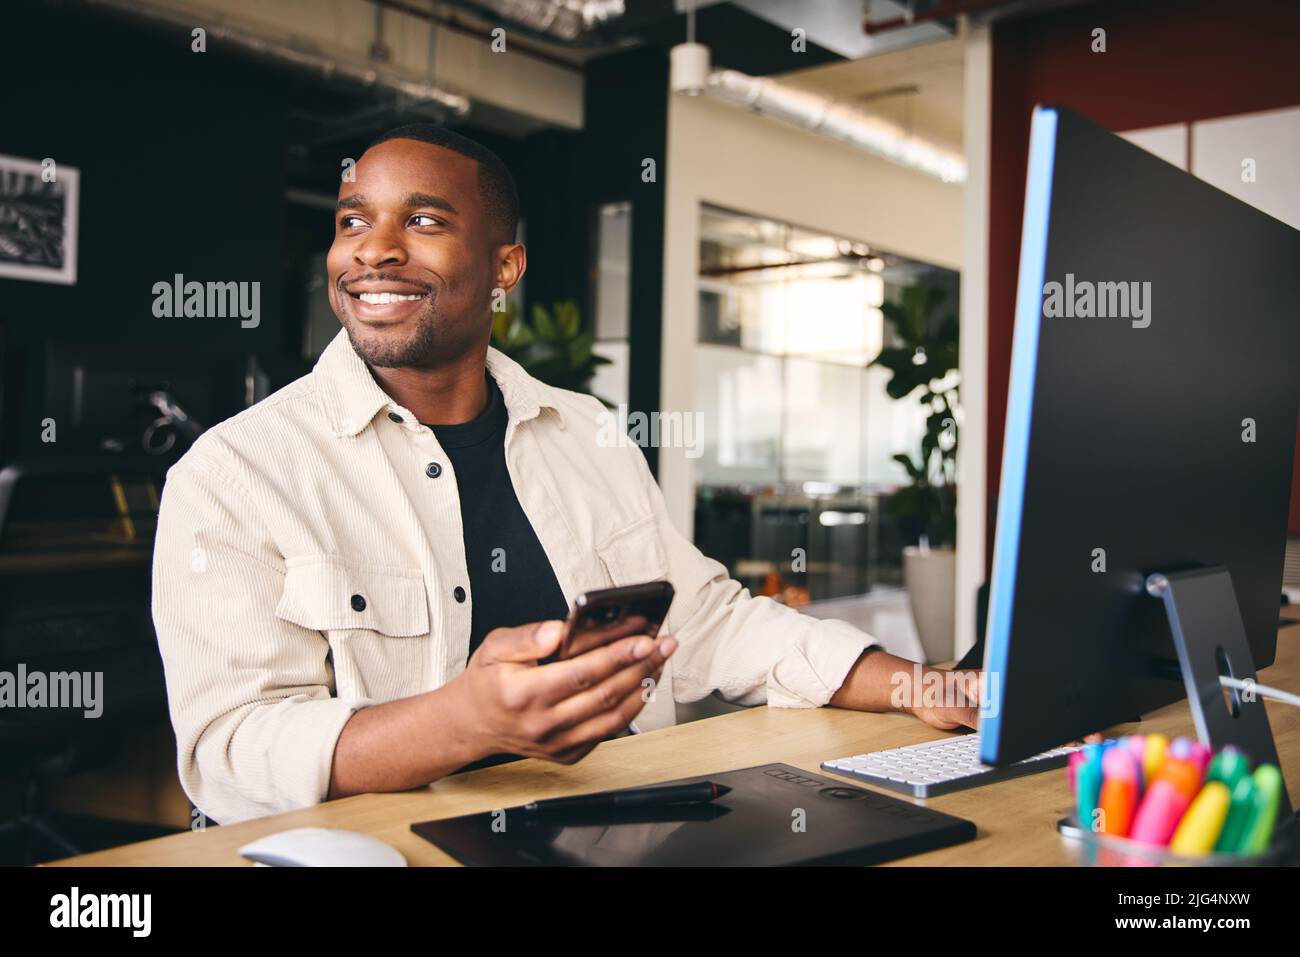 Young Black Male Smiling Advertising Marketing Or Design Creative In Modern Office Sitting At Desk Using Mobile Phone Stock Photo